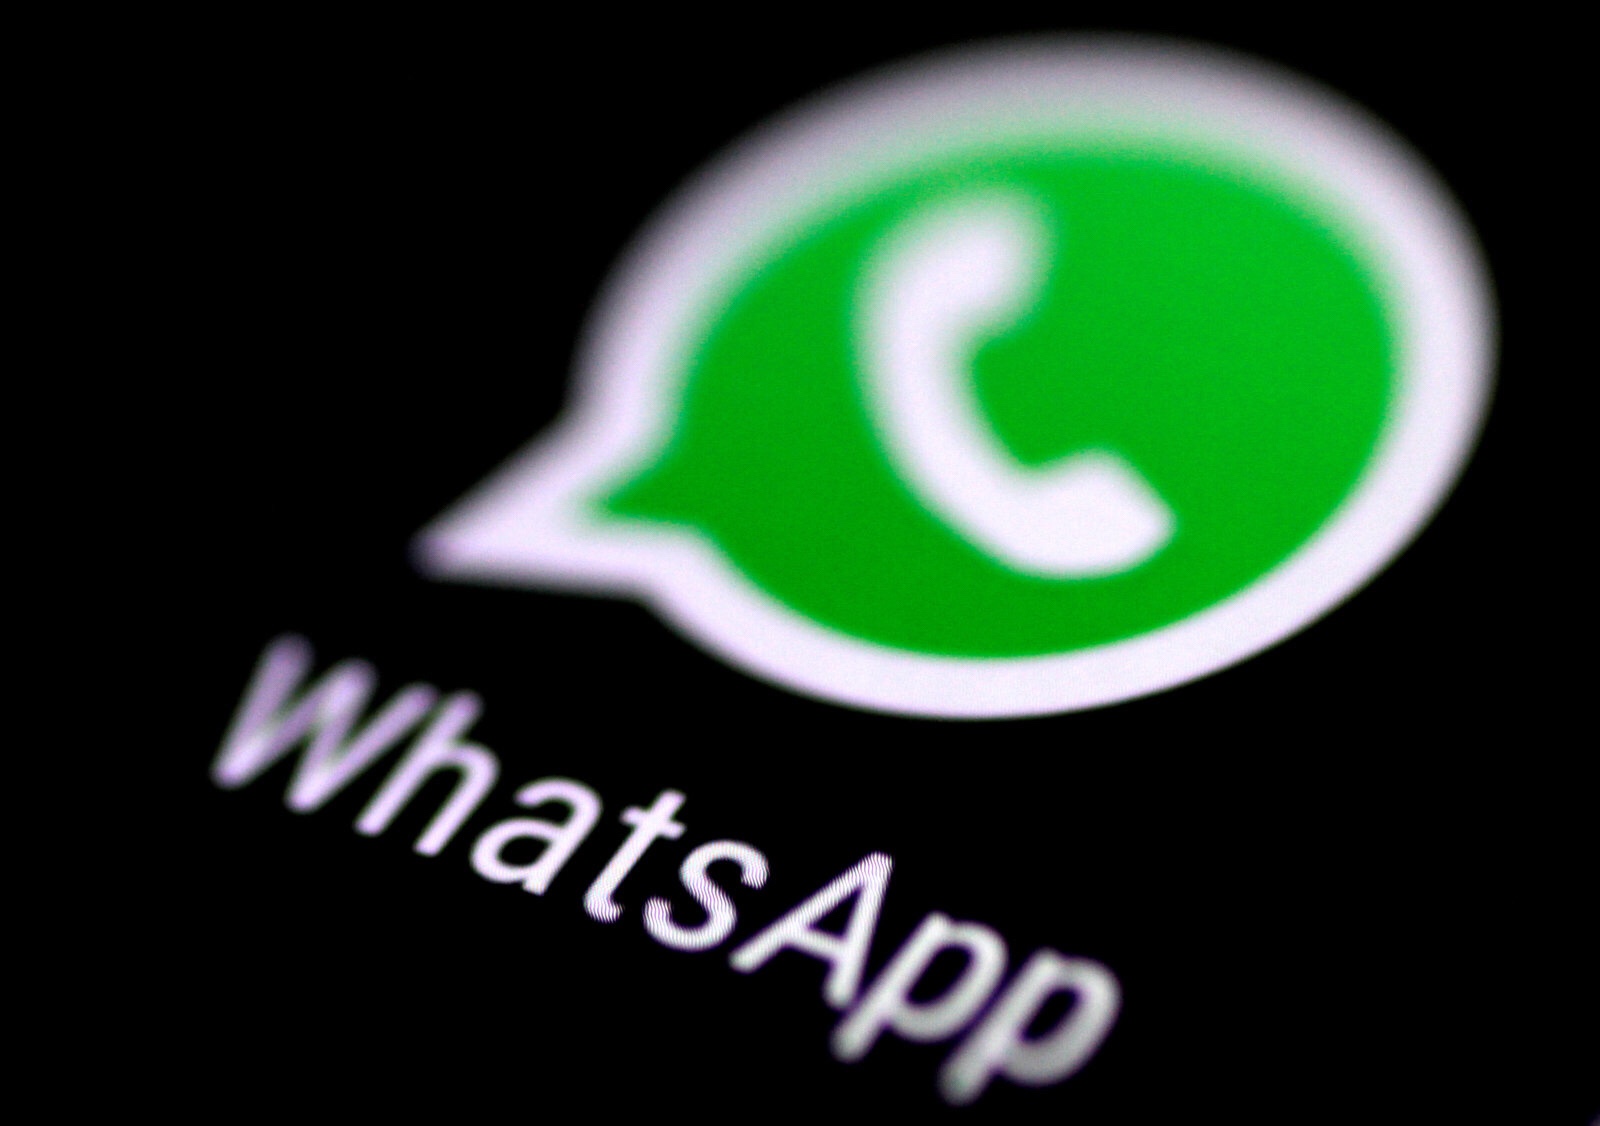 WhatsApp to comply with EU regulations by requiring users to be at least 16 years old